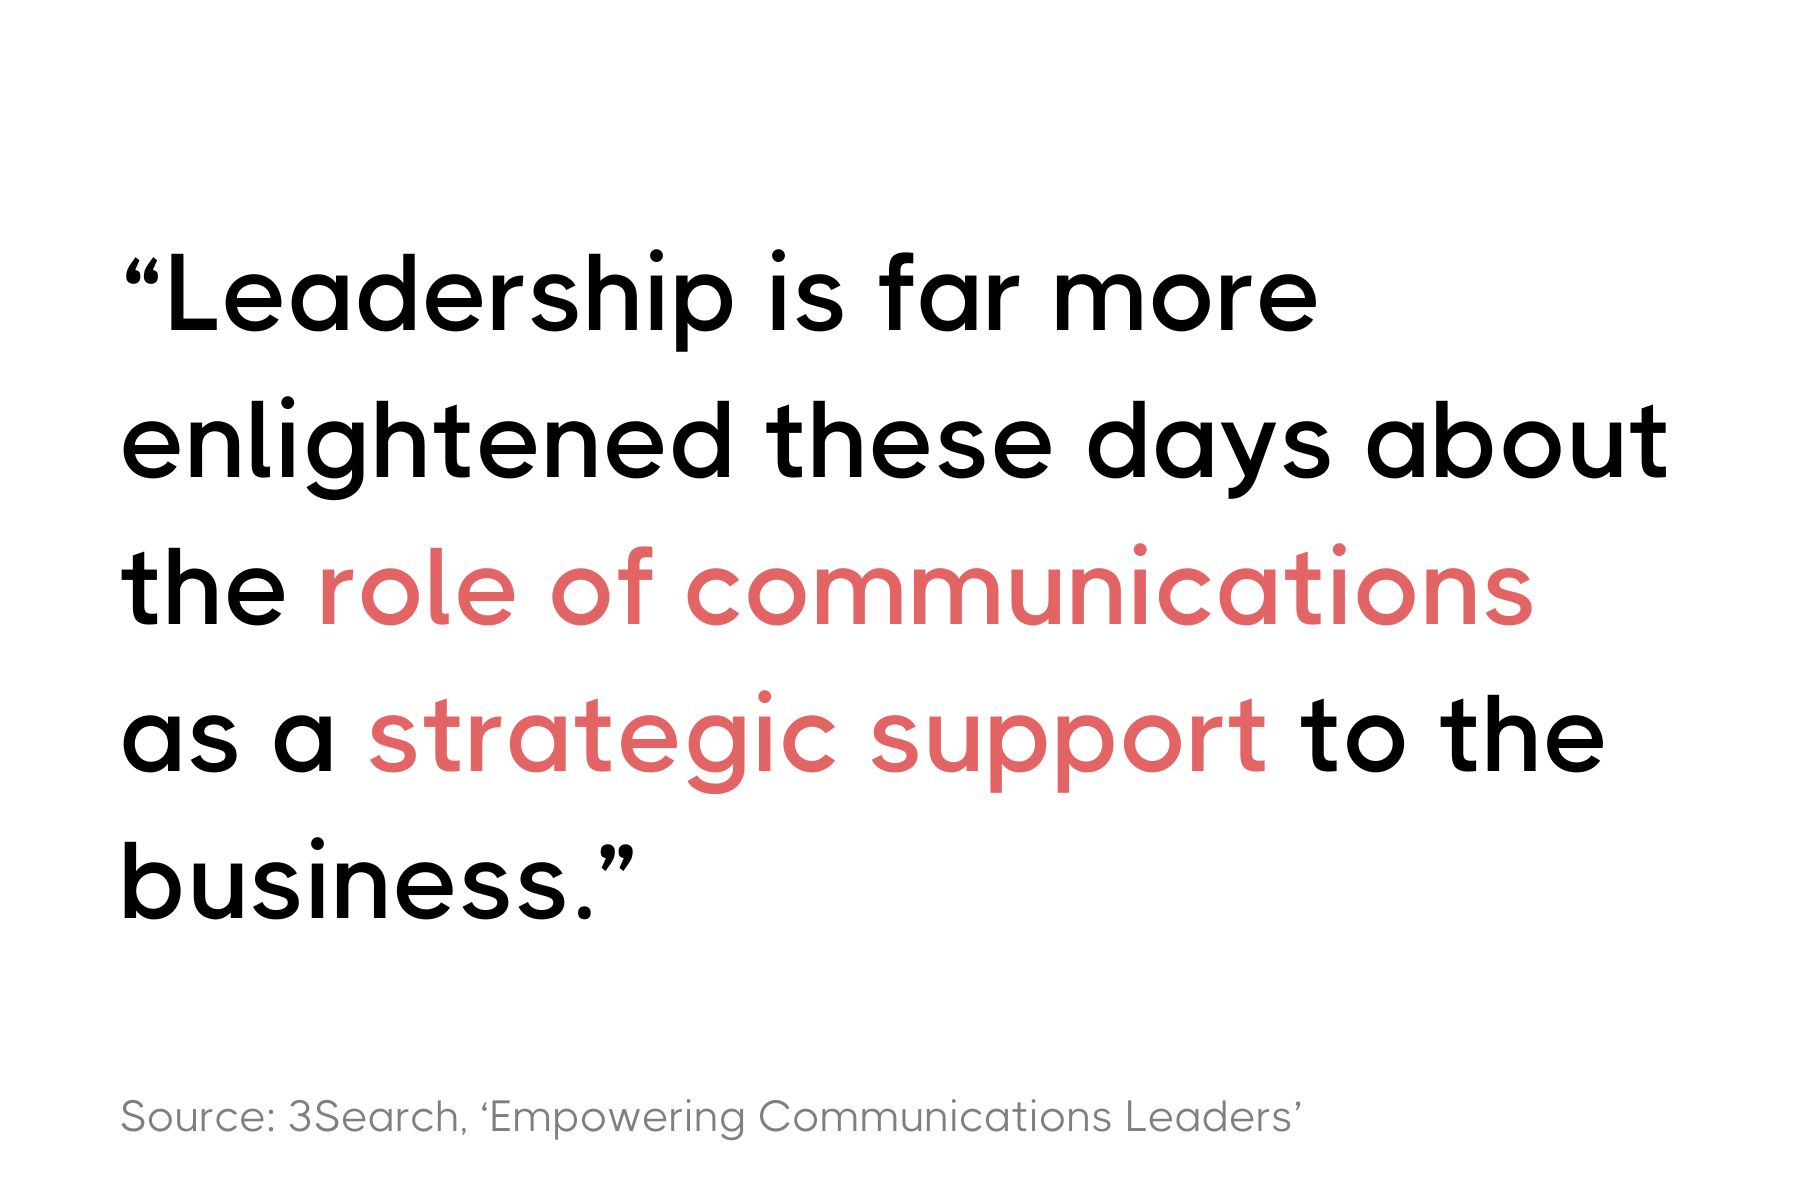 This image displays a quote in a simple text-based graphic. The quote reads: "Leadership is far more enlightened these days about the role of communications as a strategic support to the business." Below the quote, there's a citation that says, "Source: 3Search, 'Empowering Communications Leaders'". The text is primarily in black with the word "communications" highlighted in red. The background of the graphic is white. The font used for the quote is bold and modern.